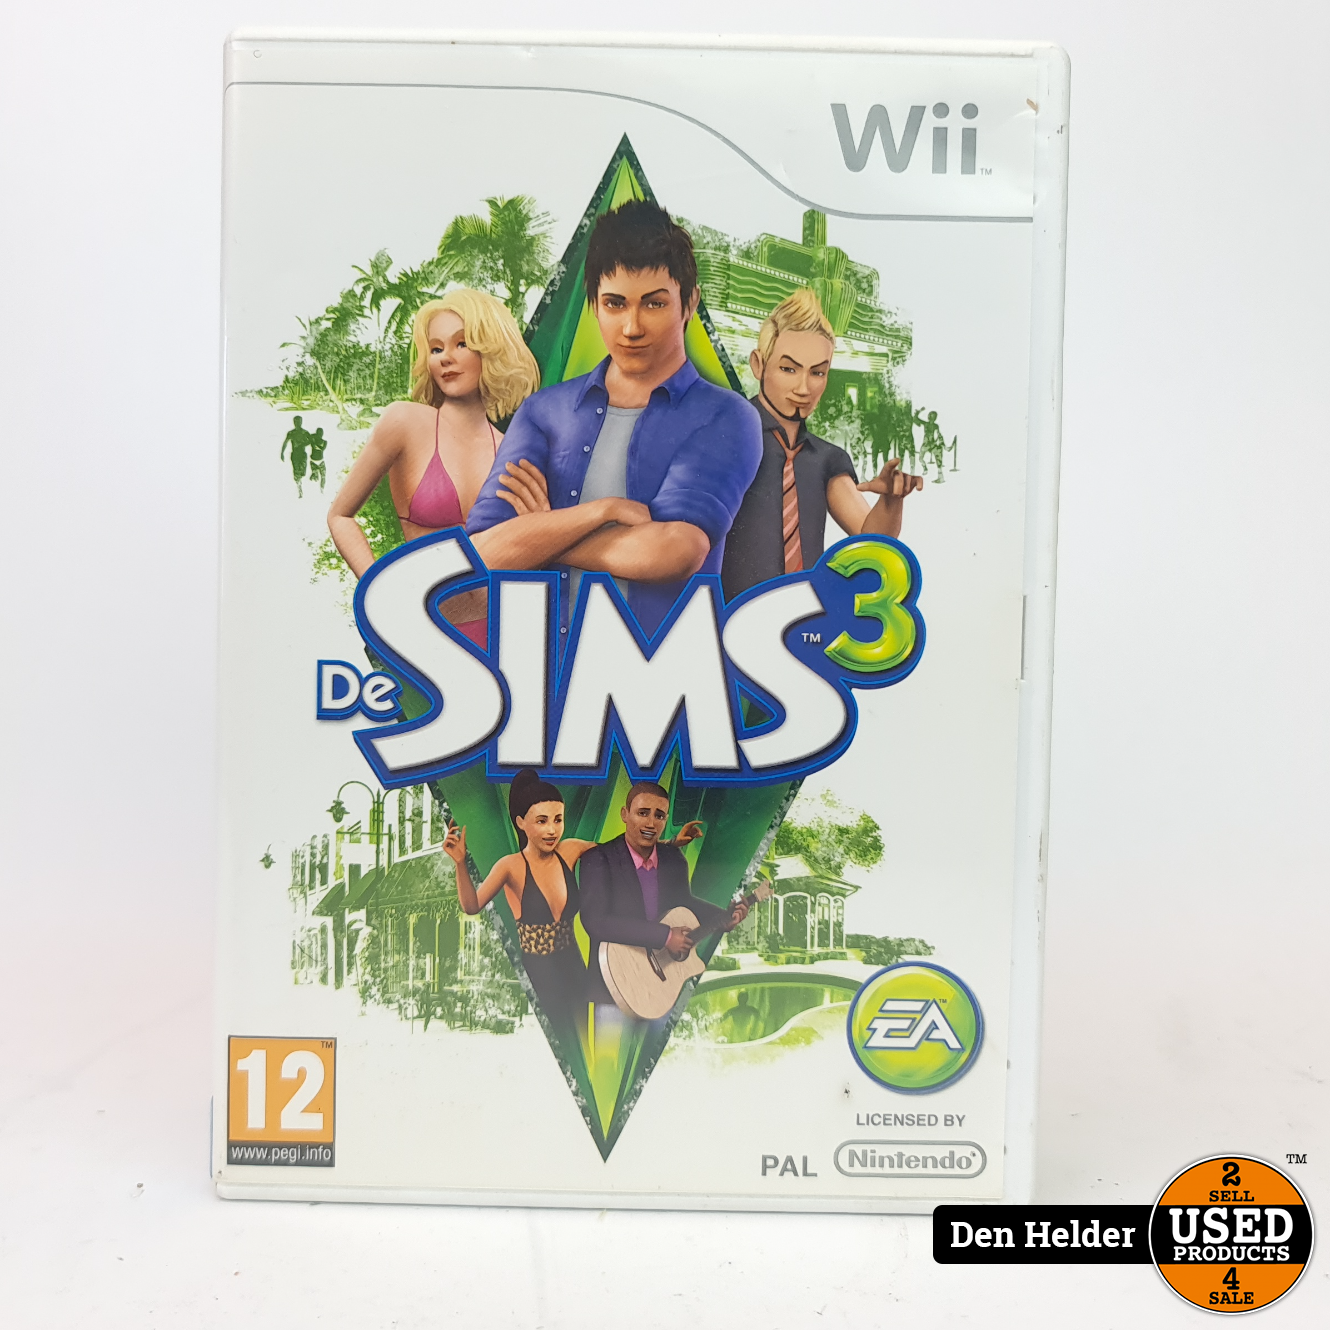 De Sims 3 Wii Game - In Nette - Used Products Den Helder